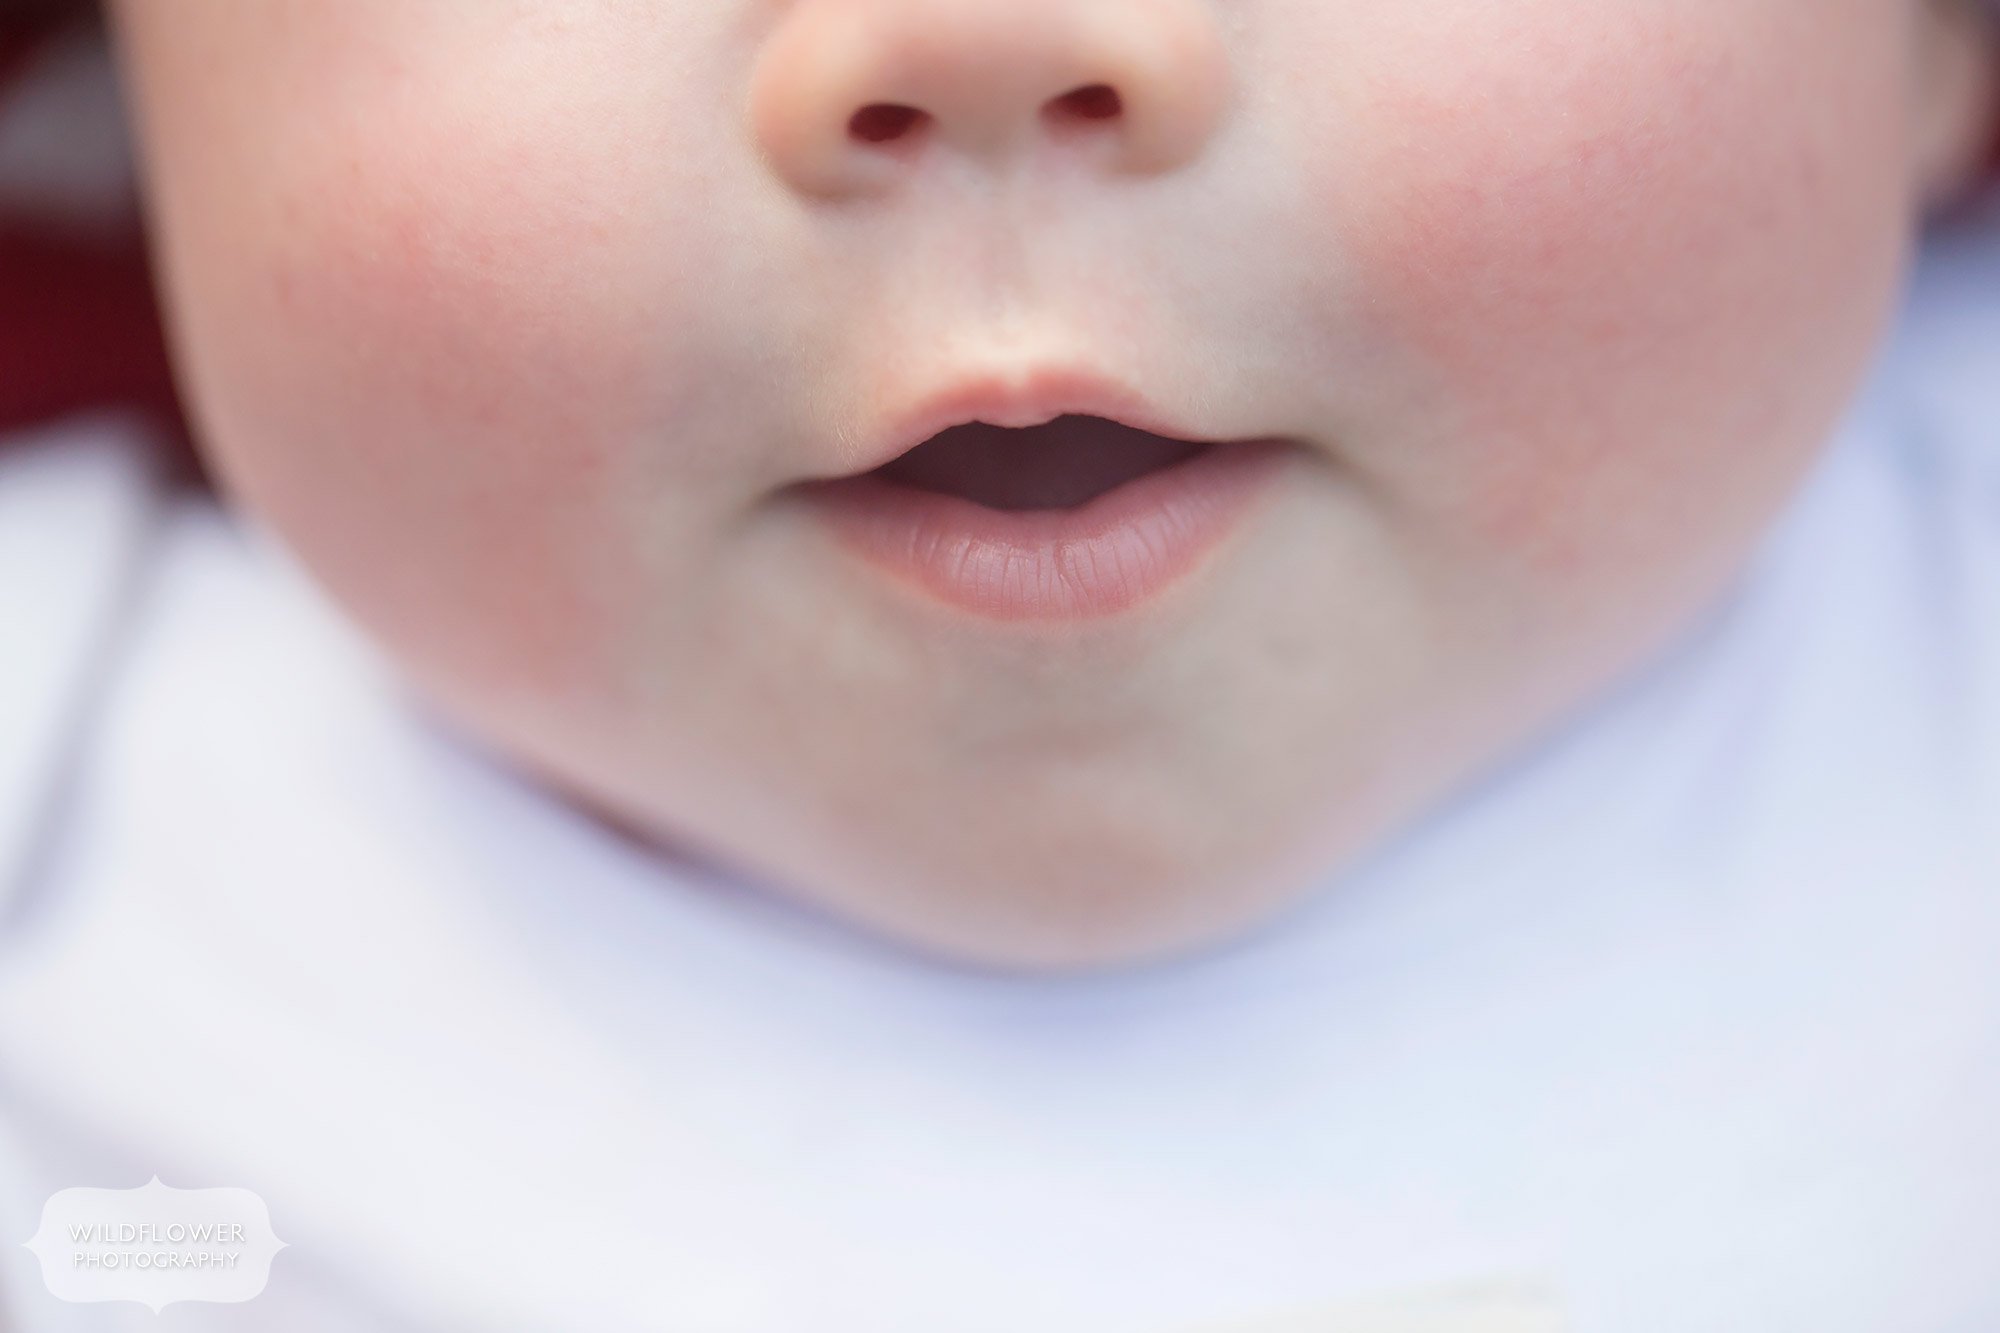 Detail photo of baby's little mouth by natural family photographer in Columbia, MO.